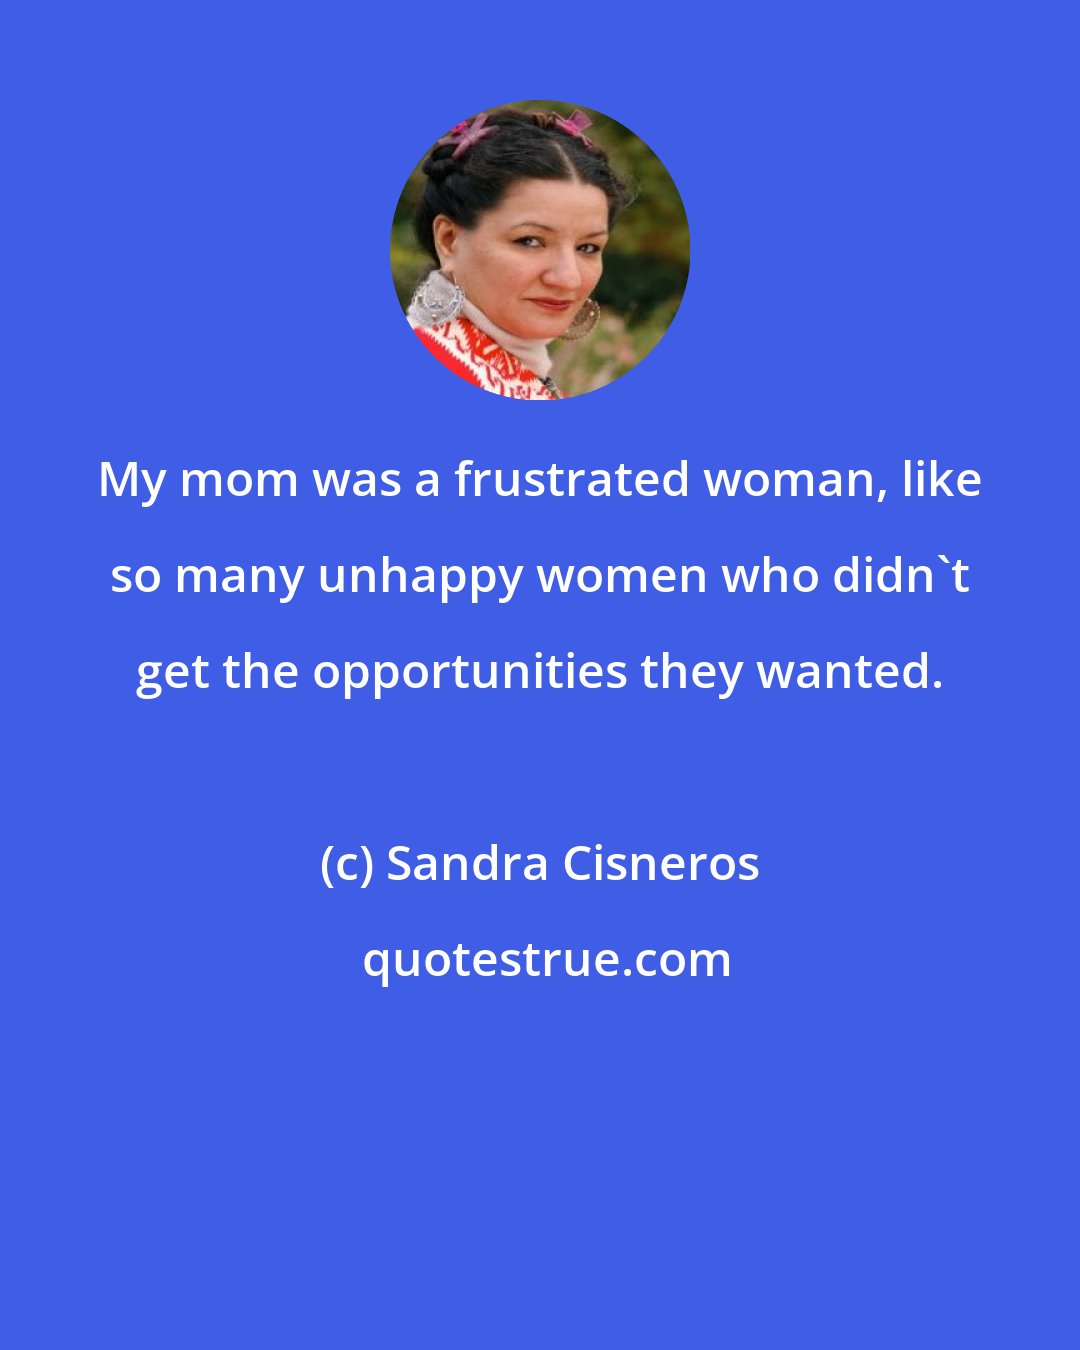 Sandra Cisneros: My mom was a frustrated woman, like so many unhappy women who didn't get the opportunities they wanted.